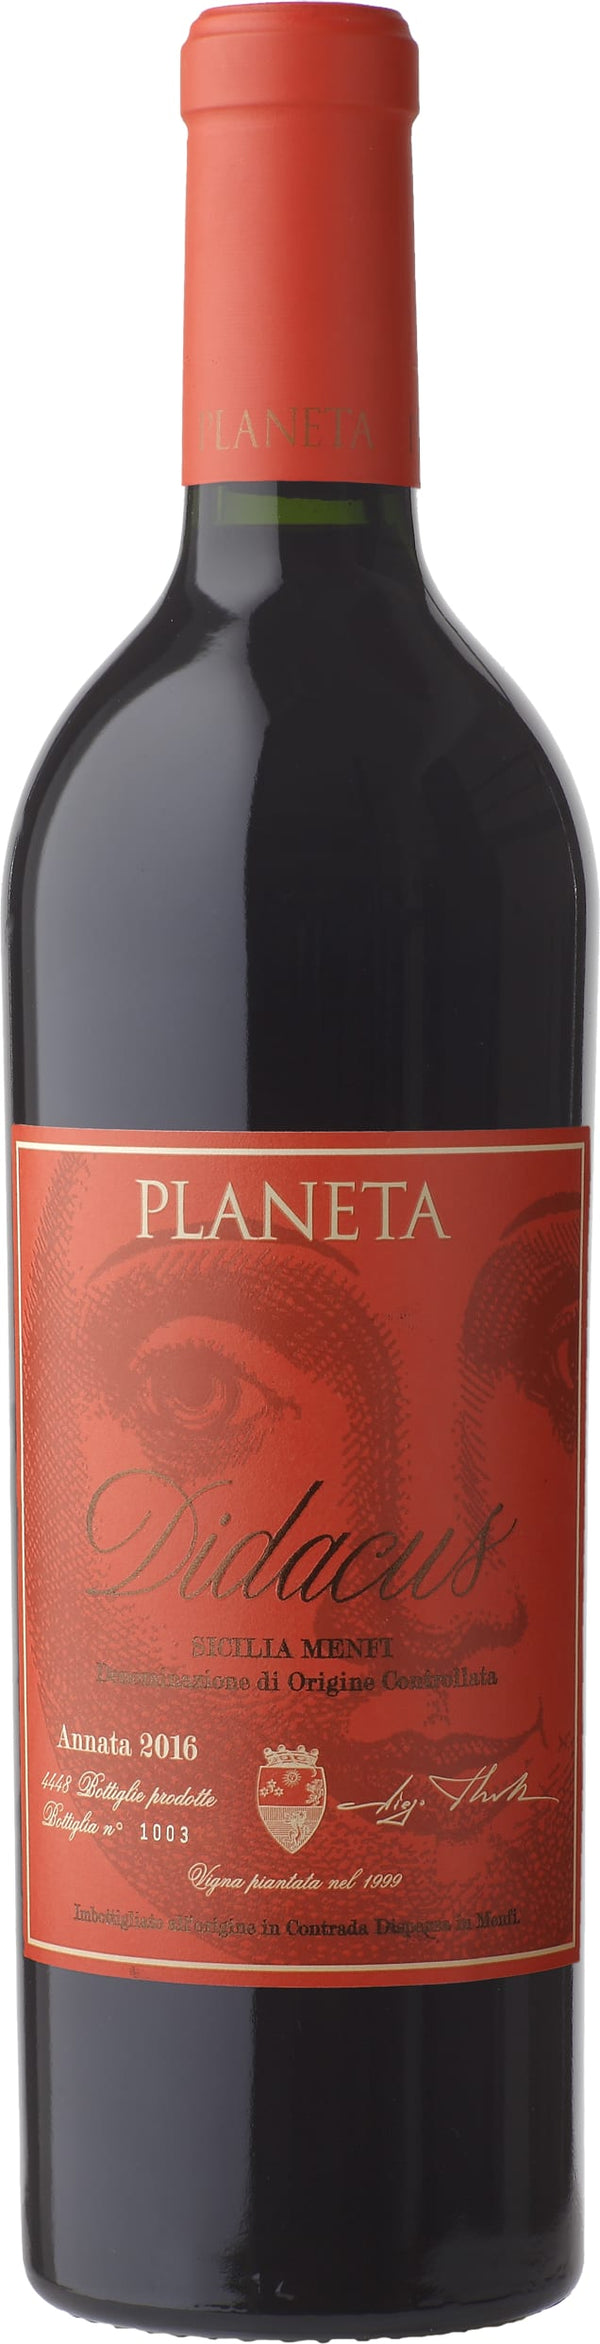 Planeta Didacus Cabernet Franc 2016 6x75cl - Just Wines 